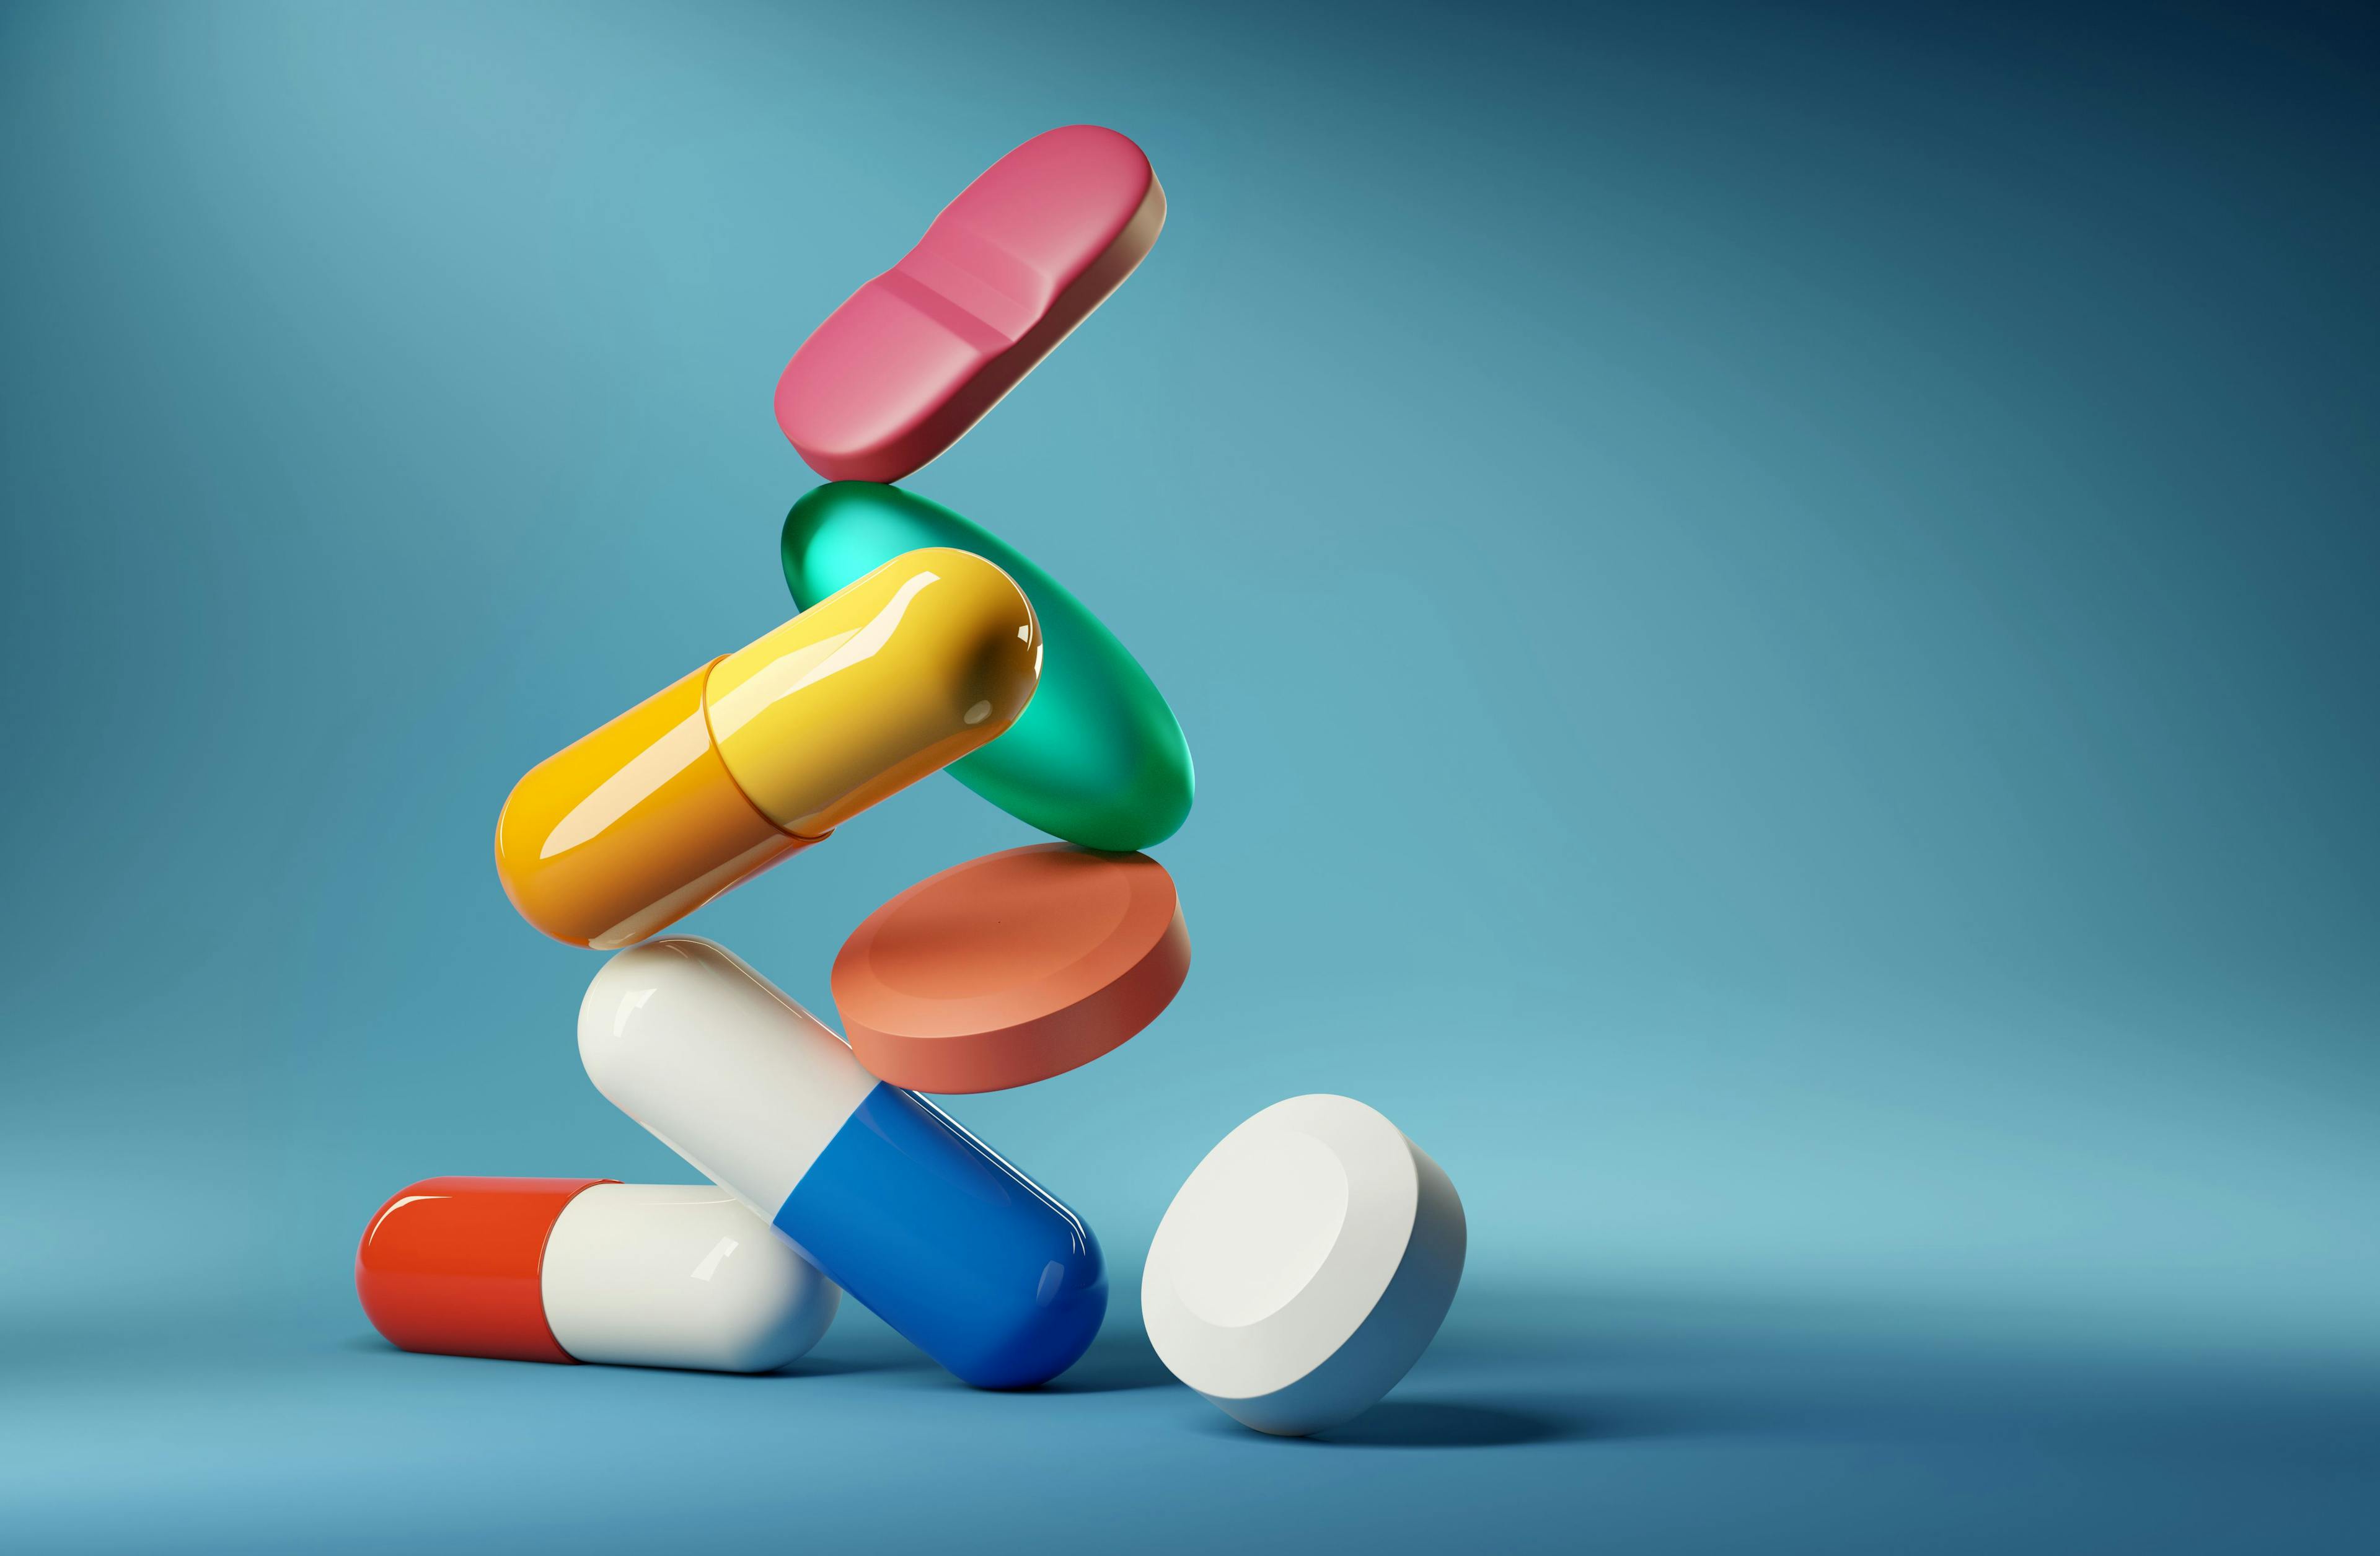 Medical balancing act. A group of medicine pills and antibiotics balancing on top of each other. 3D render illustration | Image credit: James Thew- stock.adobe.com